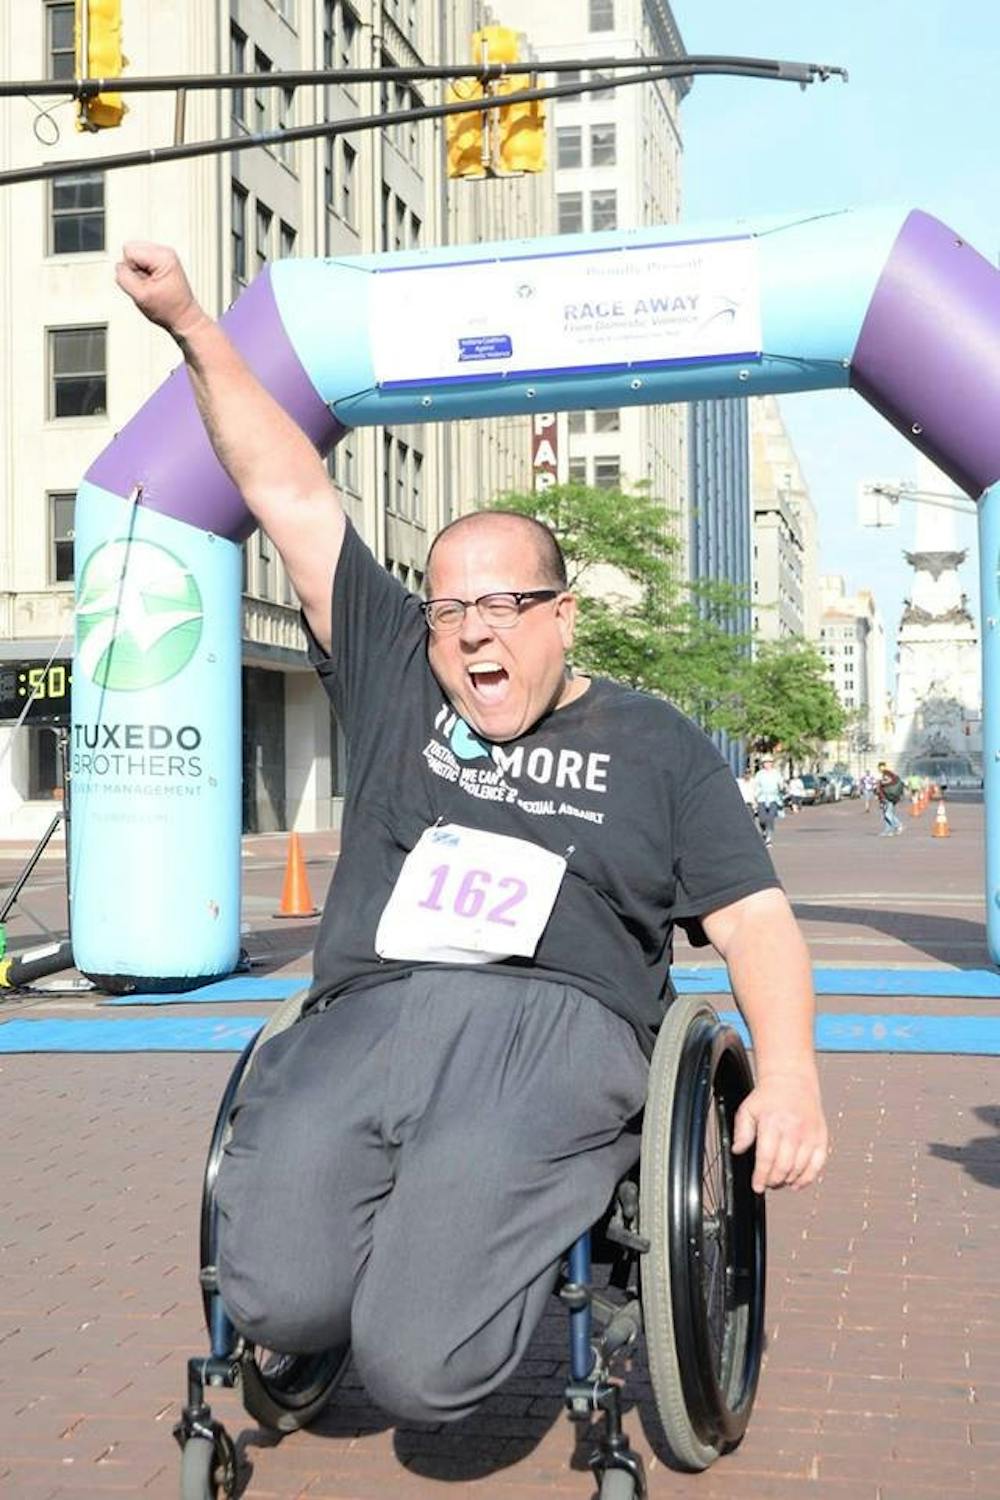 Richard Propes finishes the Race Away From Domestic Violence 5K race on April 28, 2018. Every year, Propes tries to participate in as many awareness events as possible alongside his Tenderness Tours. Richard Propes, Photo provided. 